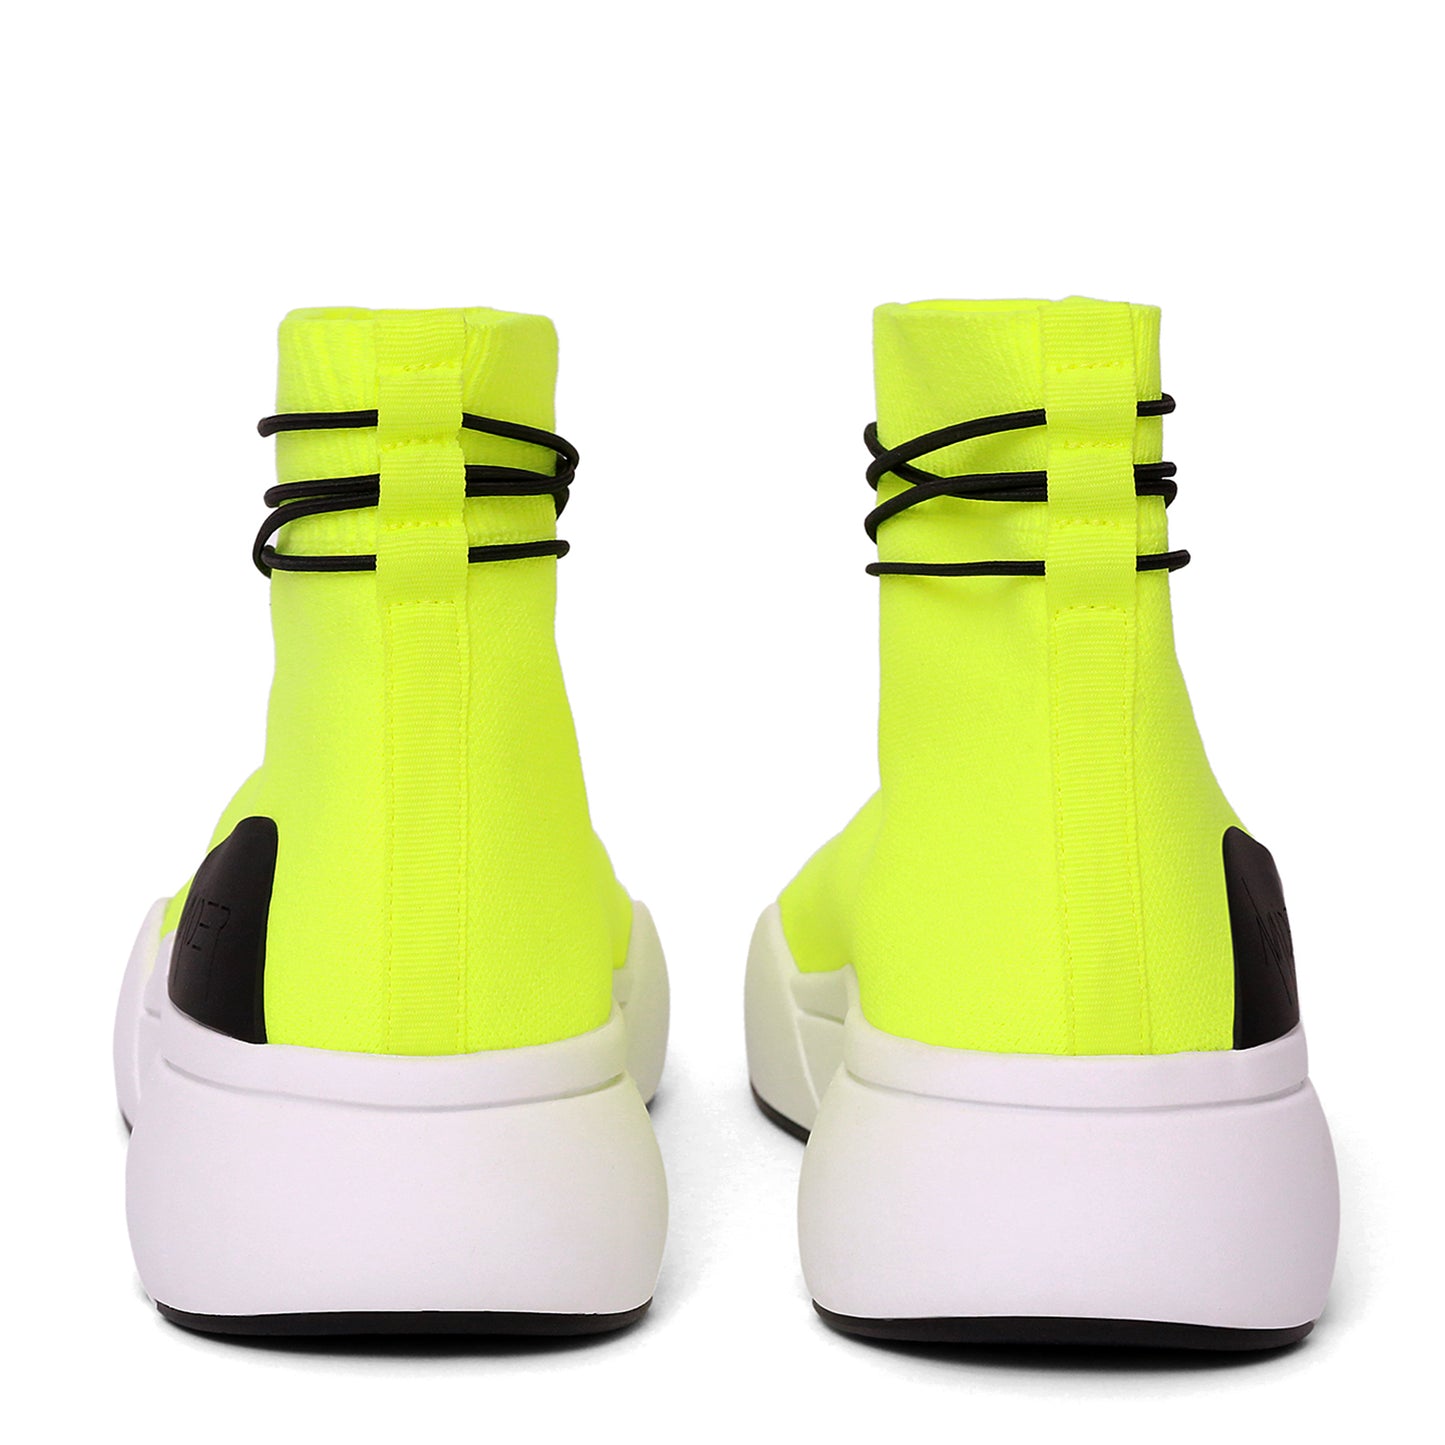 ELLIPSIS GYM SOCK TRAINER IN NEON, BLACK AND WHITE